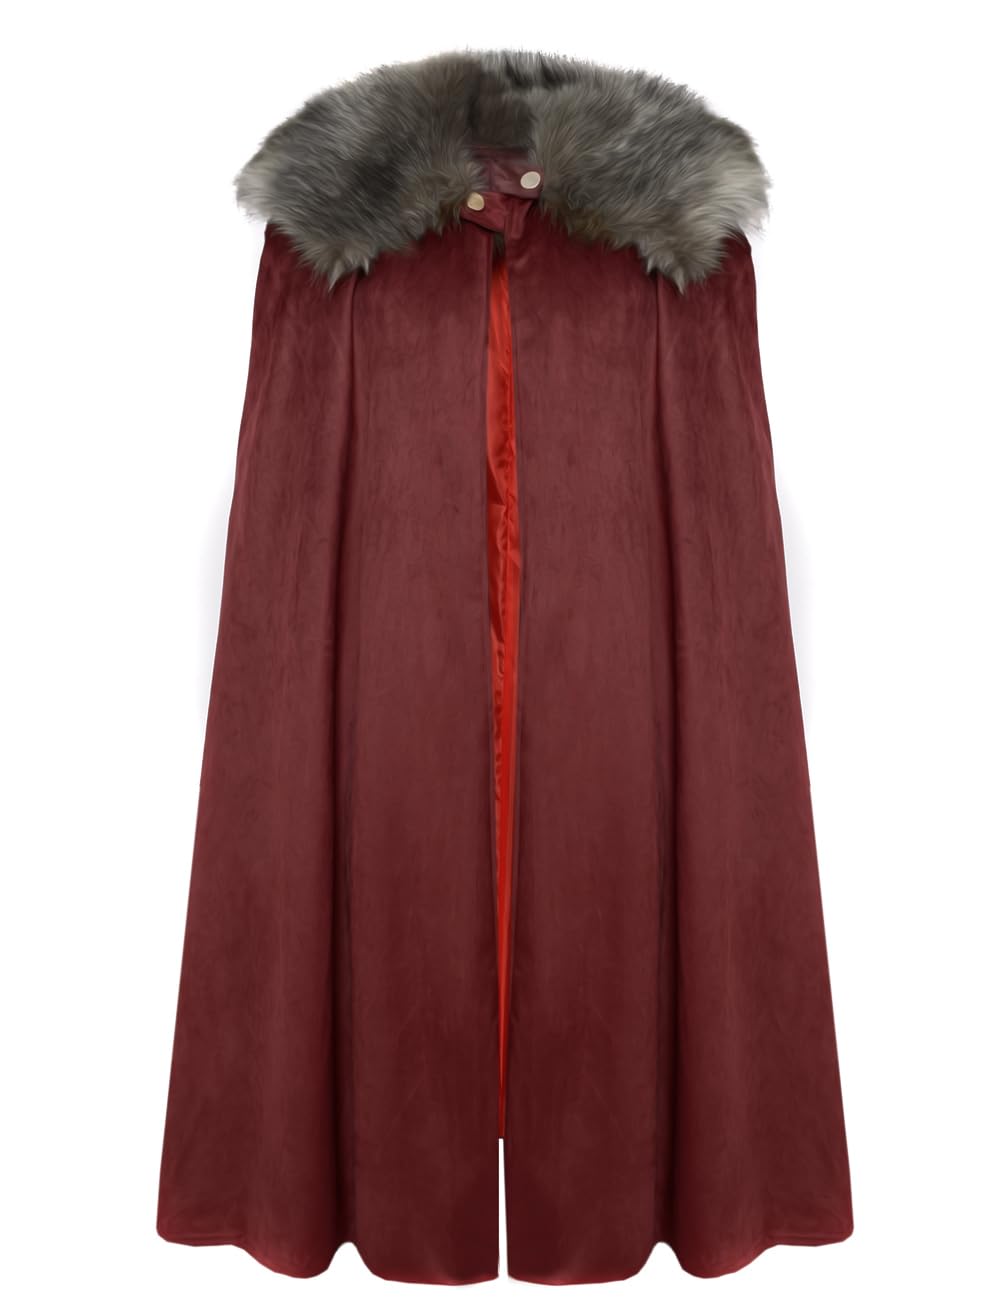 MSOrient Mens Medieval Viking Cloak Fur Cape Cosplay Costume Renaissance King With Fur Cloak Halloween Costume Small Brown